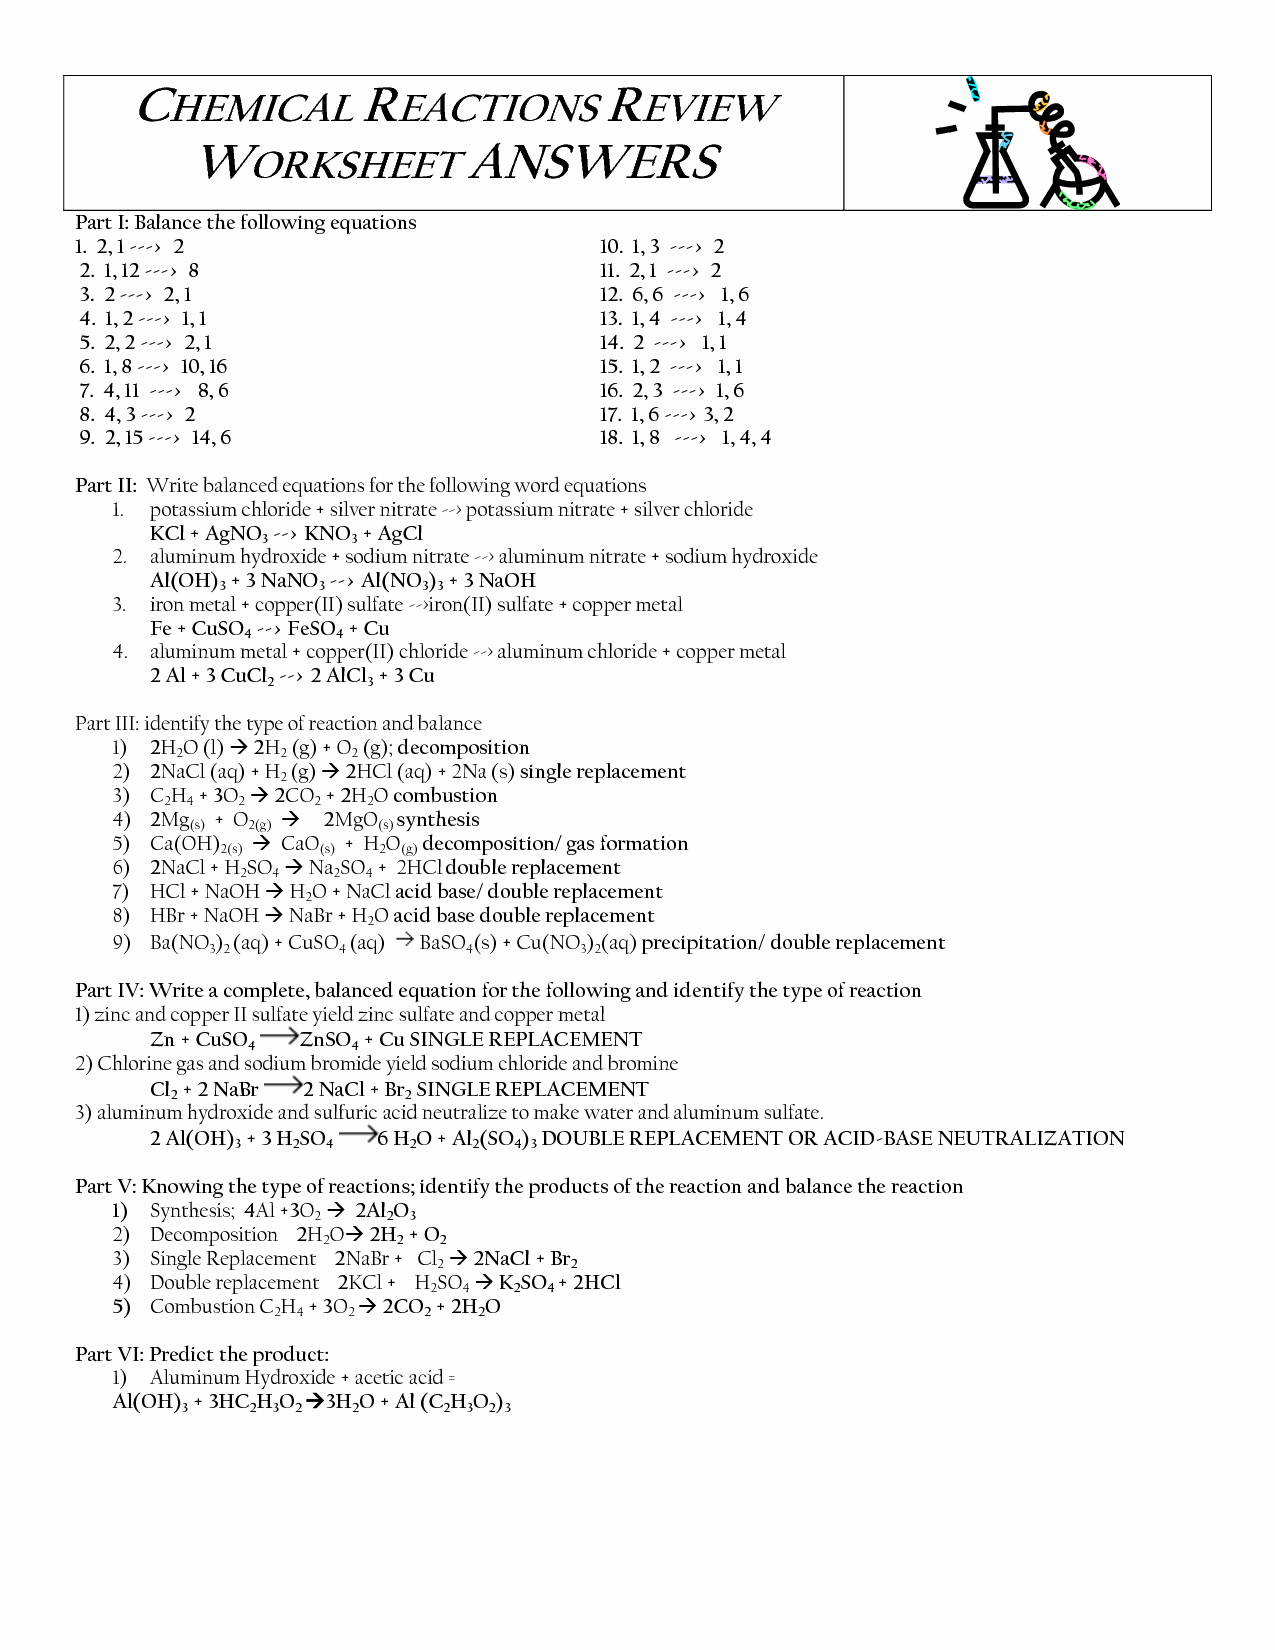 Types Of Reactions Worksheet Answers Inspirational 16 Best Of Types Chemical Reactions Worksheets